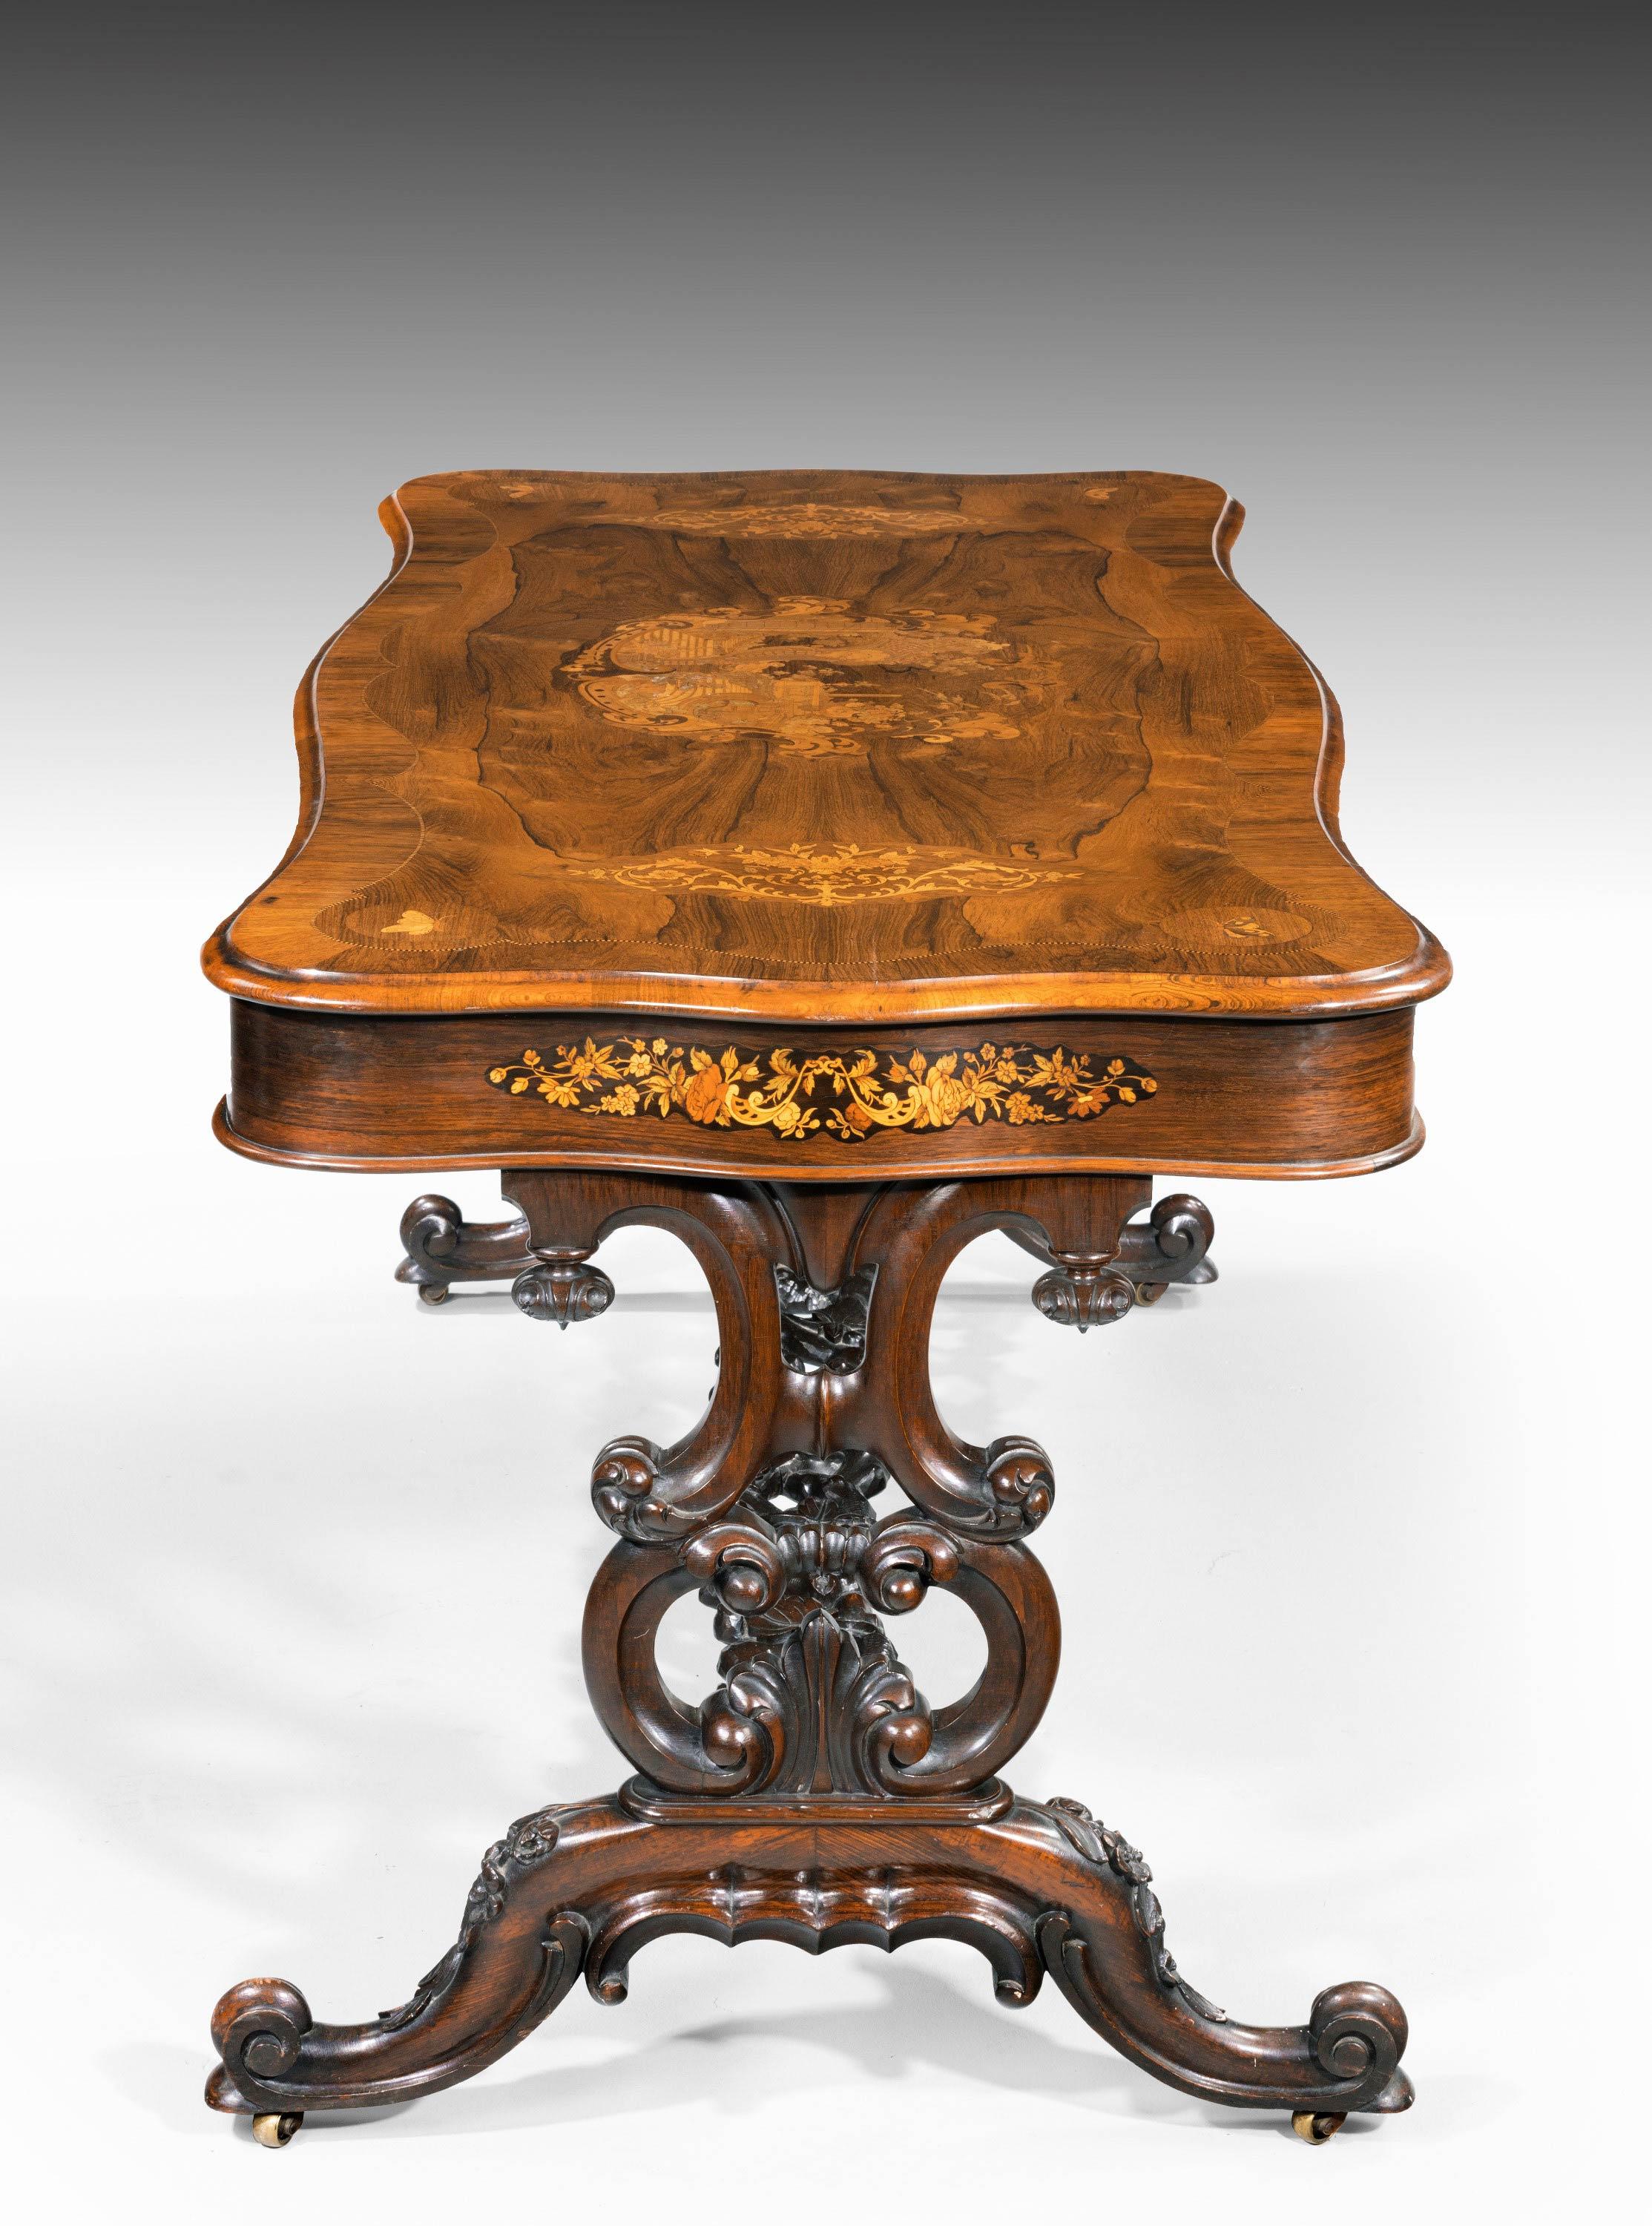 A quite superb 19th century rosewood, kingwood and marquetry center standing table of serpentine outline overall. With a beautifully and elaborately carved stretcher between elegant cabriole supports. The tops and sides of finely executed panels of